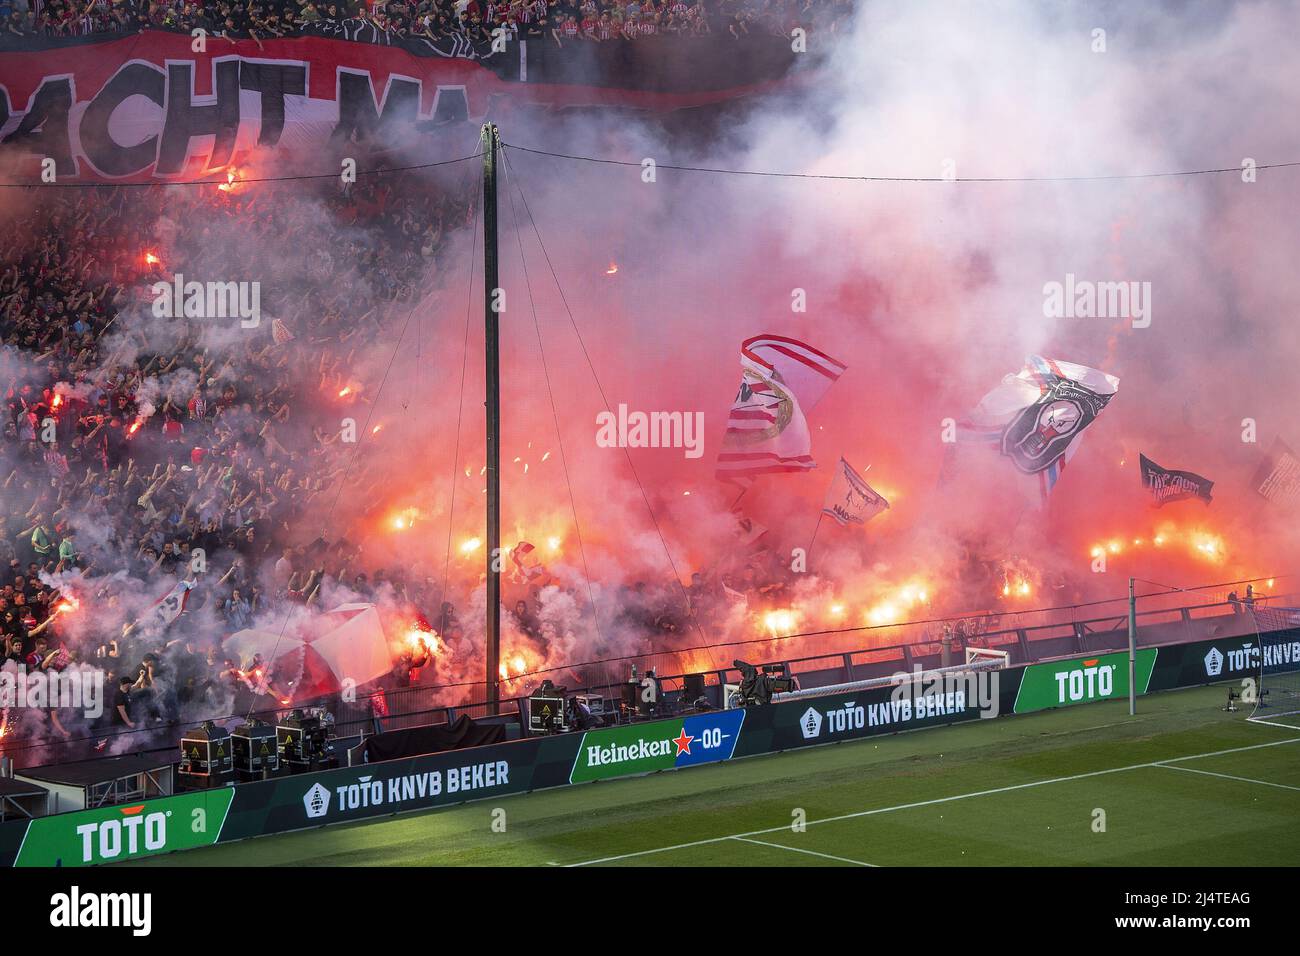 ROTTERDAM, 17-04-2022, Stadion De Kuip, Dutch TOTO KNVB Beker finale Football, season 2021 2022, between PSV - final result 2-1, fans of PSV create atmosphere with torches, smoke and